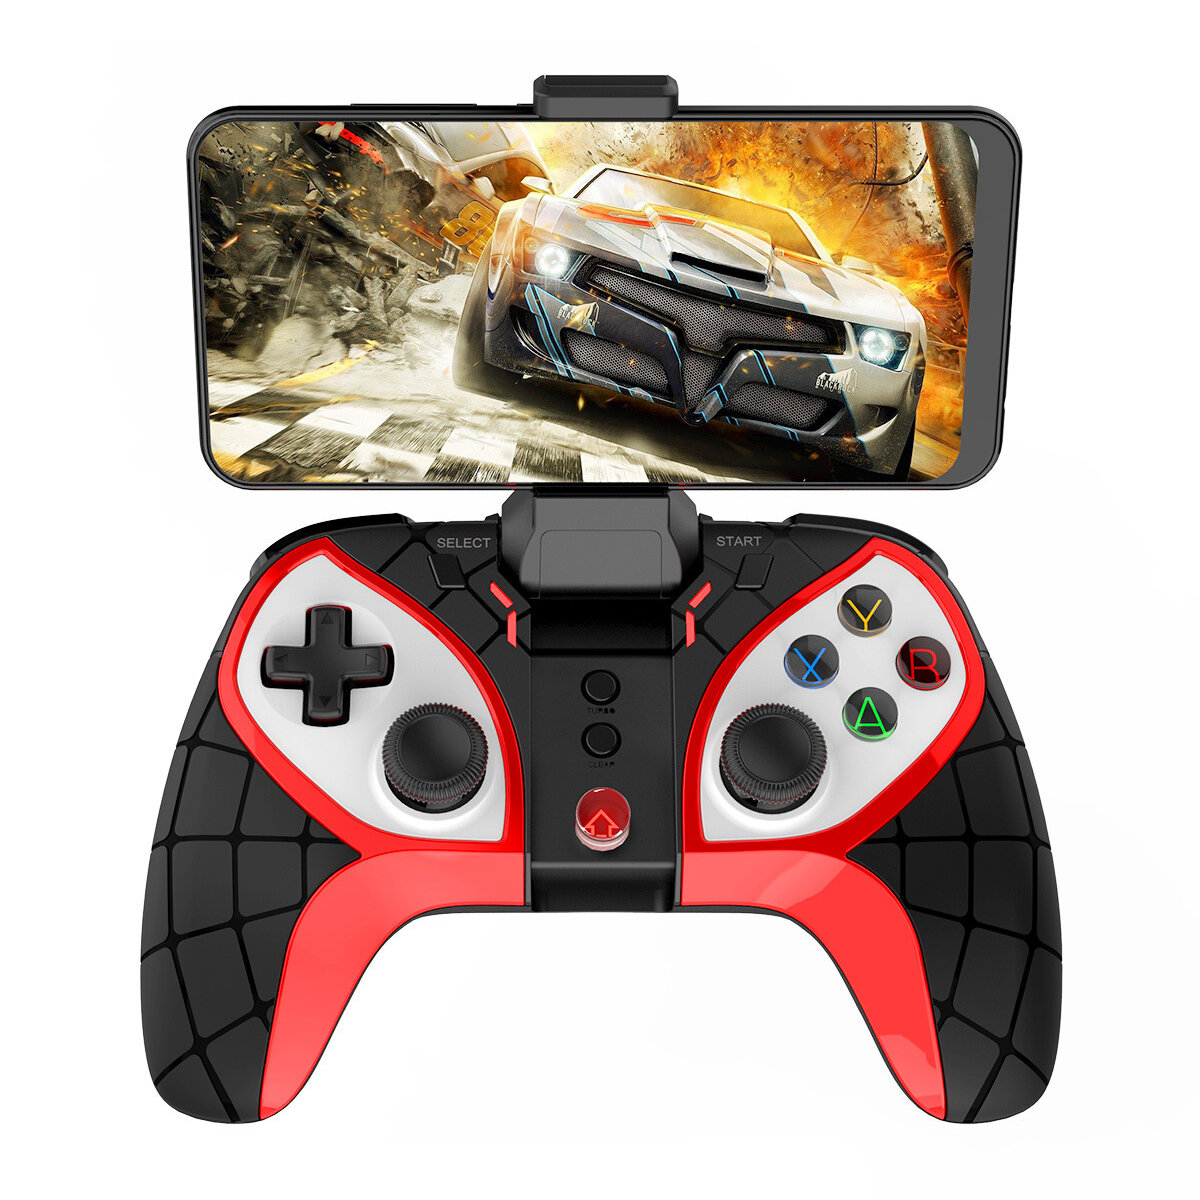 iPega PG-9210 Bluetooth Gamepad for Nintendo Switch PS3 Game Console for iOS Android Mobile Phone PC